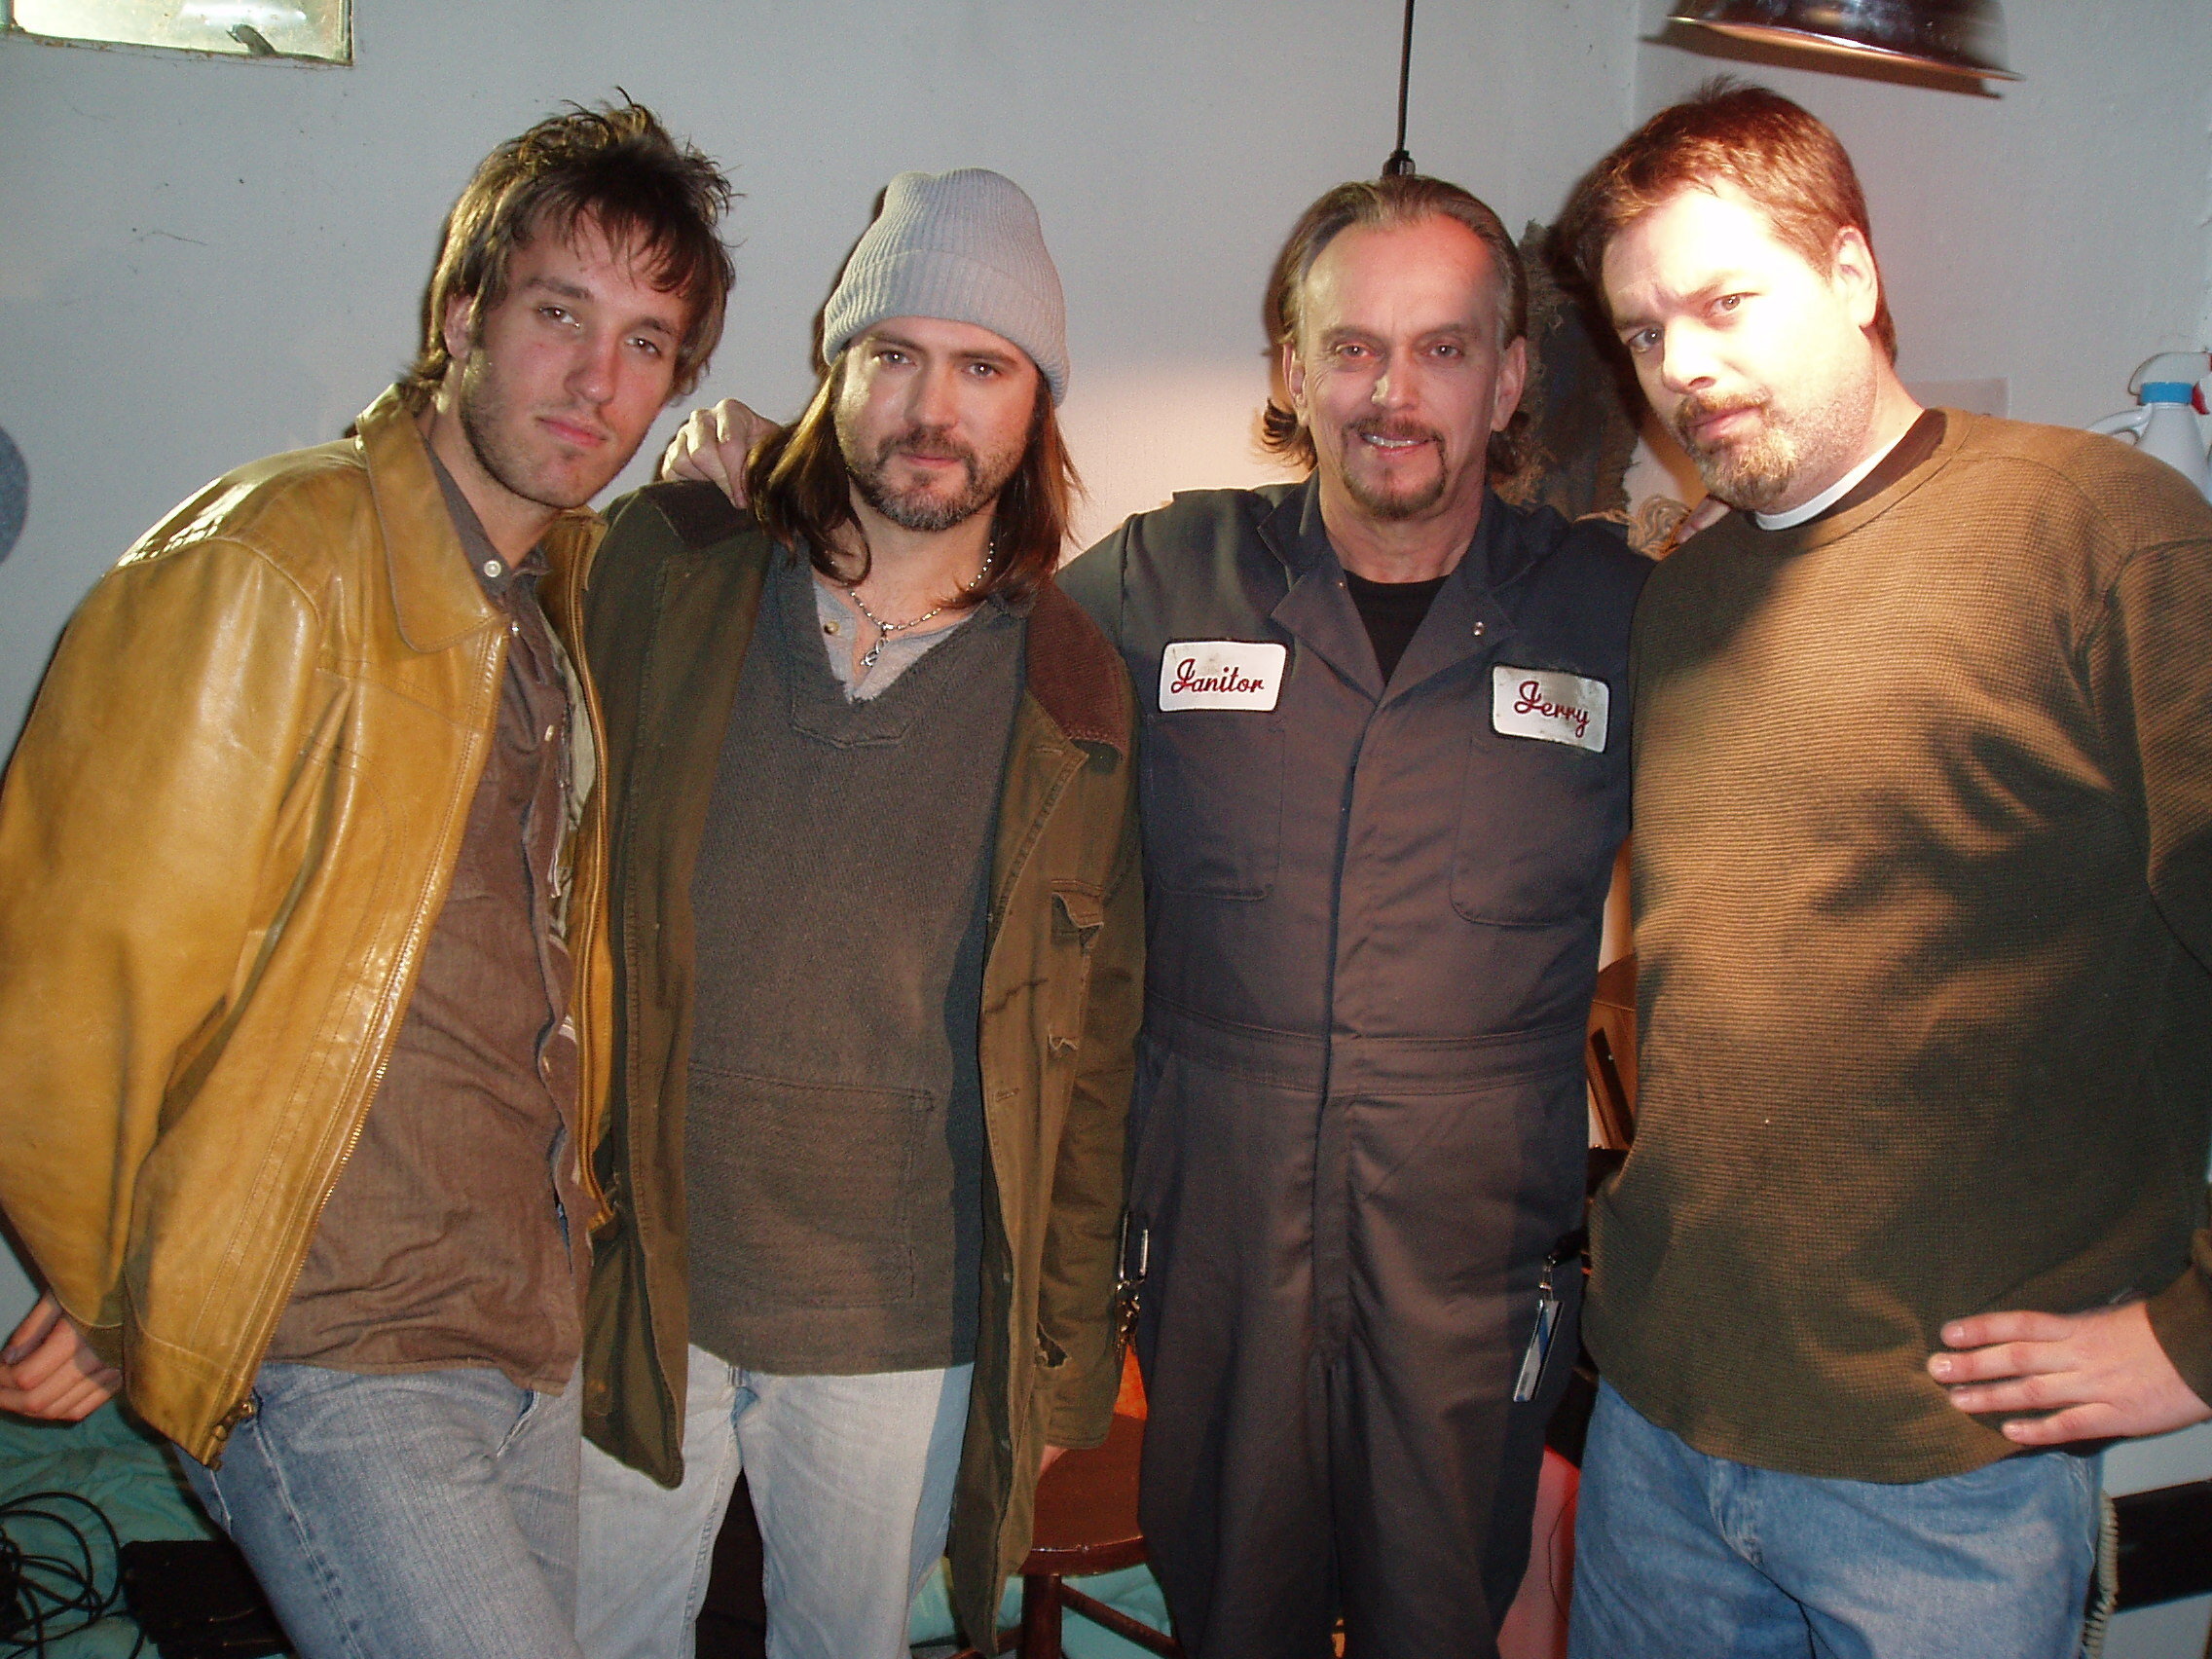 From left, Nathanial Nose (Ghost Town, Talent), DJ Perry (An Ordinary Killer, The 8th Plague, Ghost Town), Anthony Hornus (An Ordinary Killer, Miralce at Sage Creek, Ghost Town) and Jeff Burton (The Final Curtain, Dead End Road) on the Michigan set of Mur